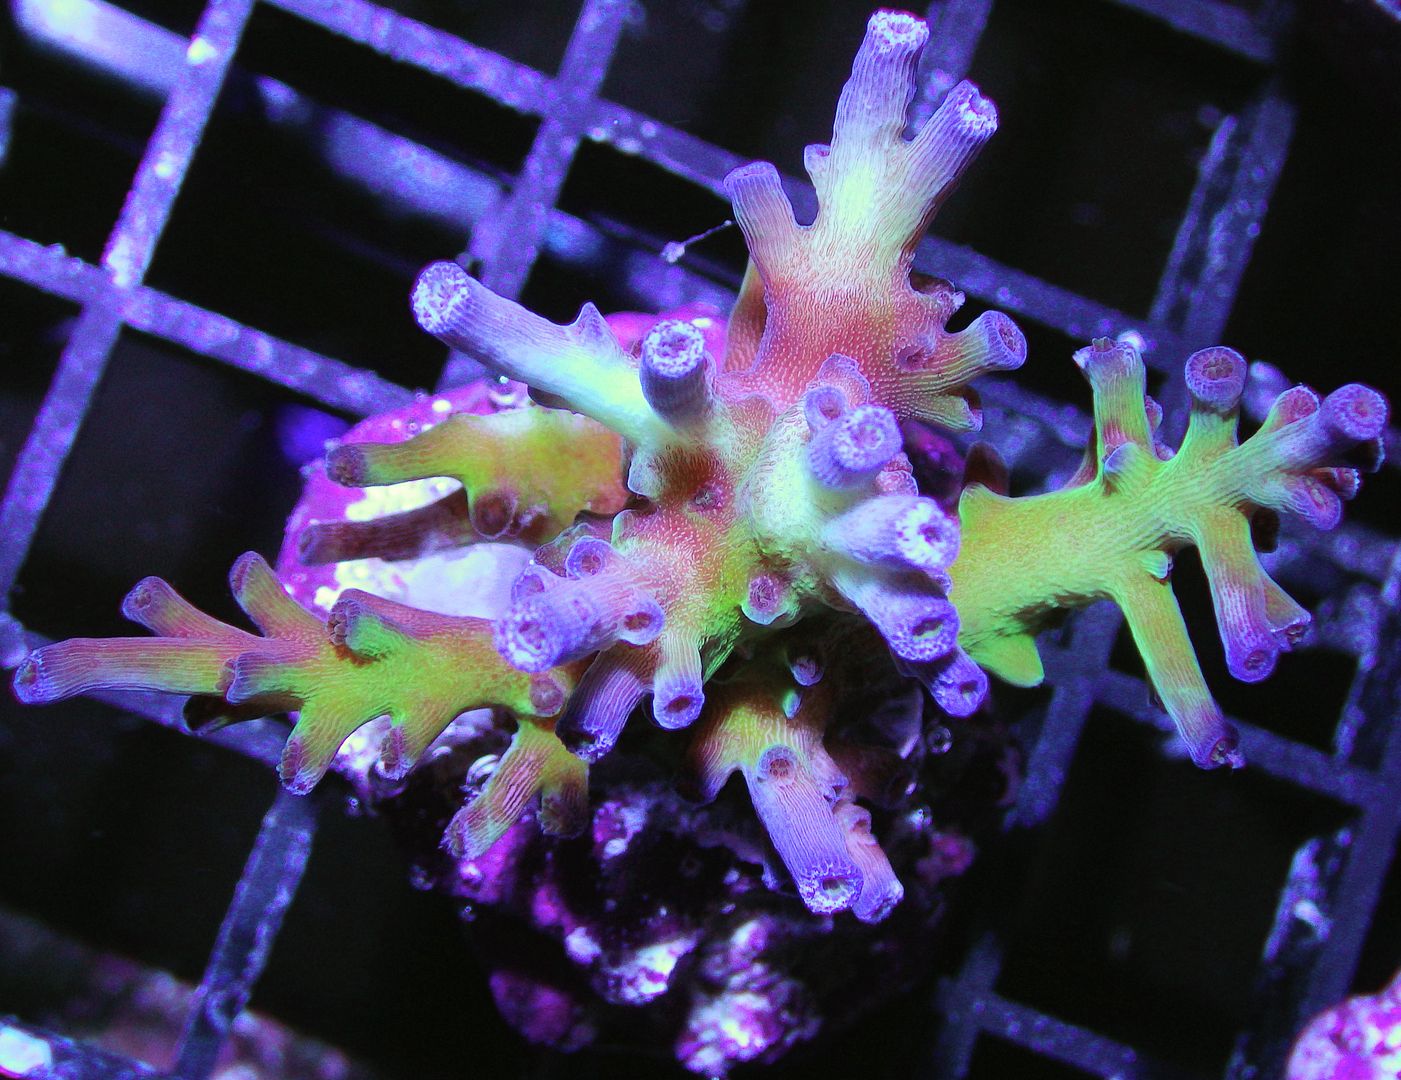 RIMG06702 zps13gghpo4 - Chunky Frags posted on New Site